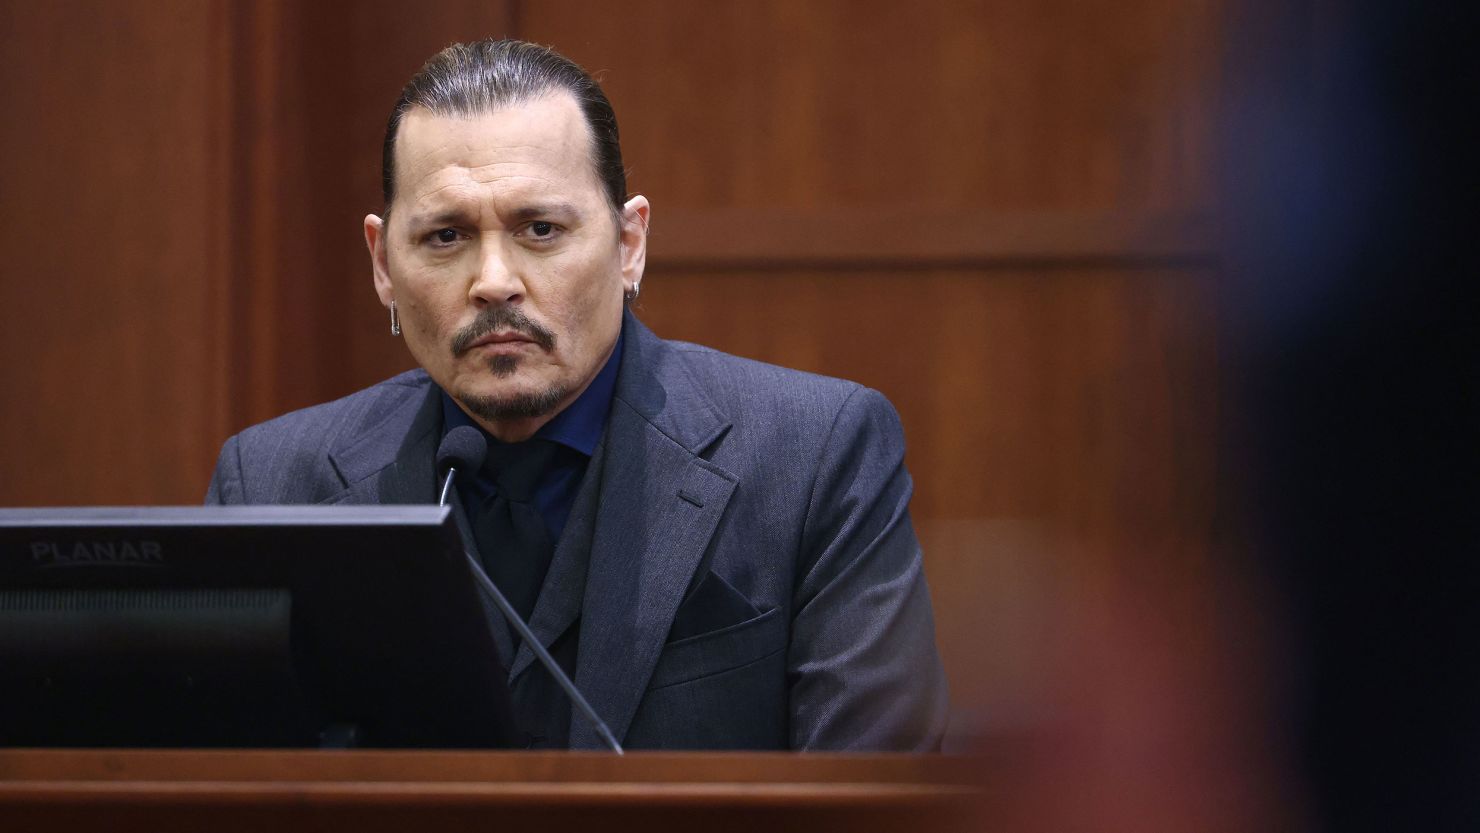 Johnny Depp on the stand in his defamation trial against Amber Heard on Thursday.